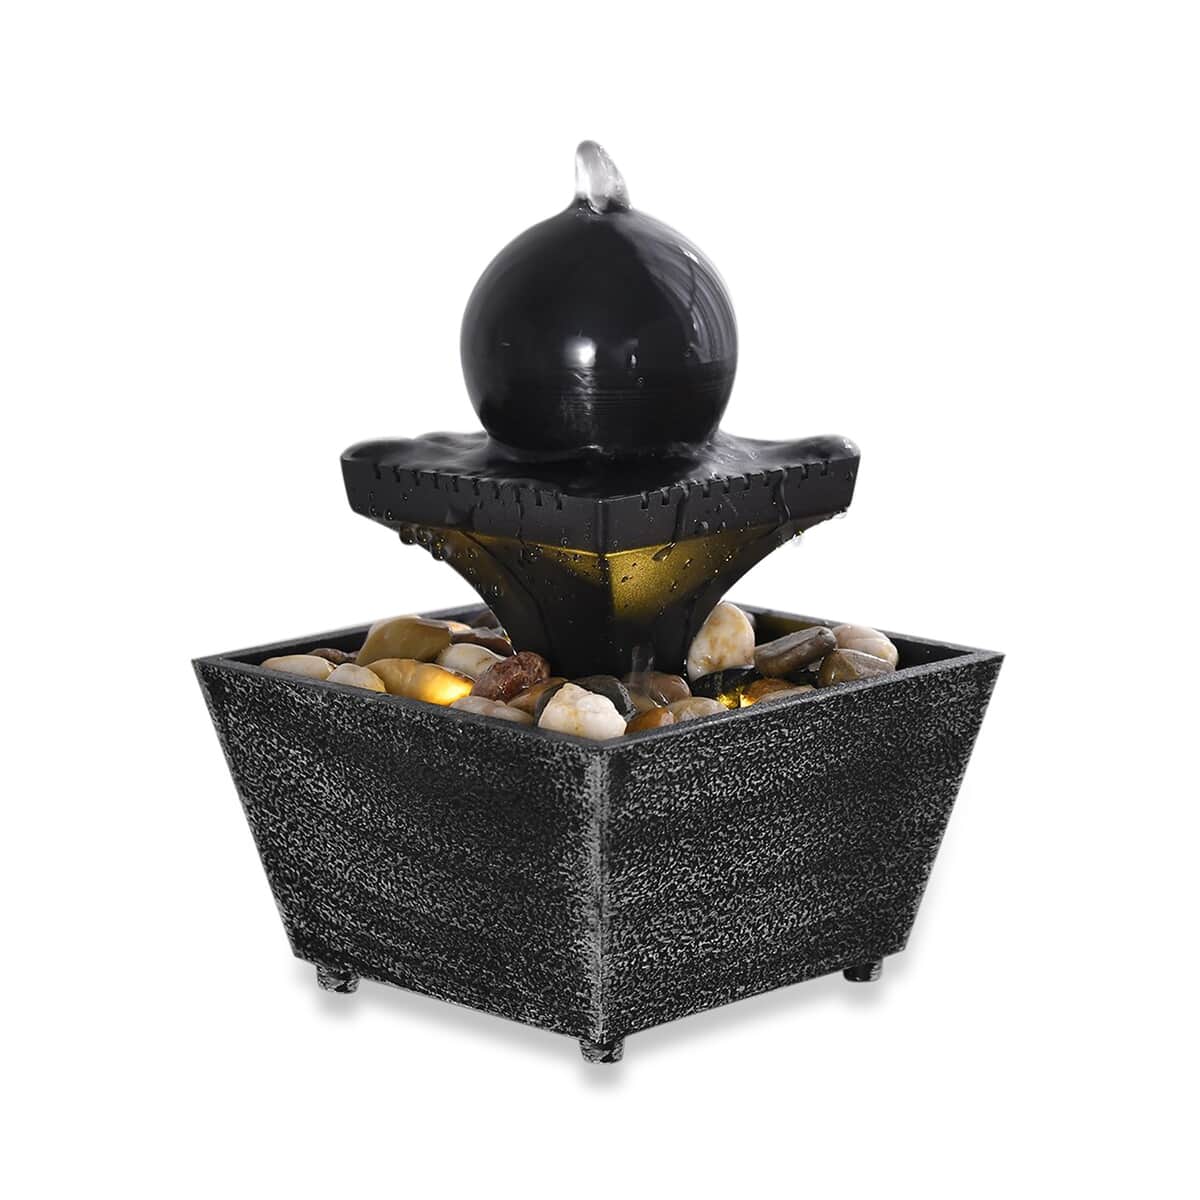 Black Mini Spherical Top Water Fountain with LED Light, Battery Operated 3 Tier Table Top Indoor Outdoor Showpiece Fountain for Living Room Table Decor Bedroom Office - Water Circulation (2xAA Battery Not Included) image number 0